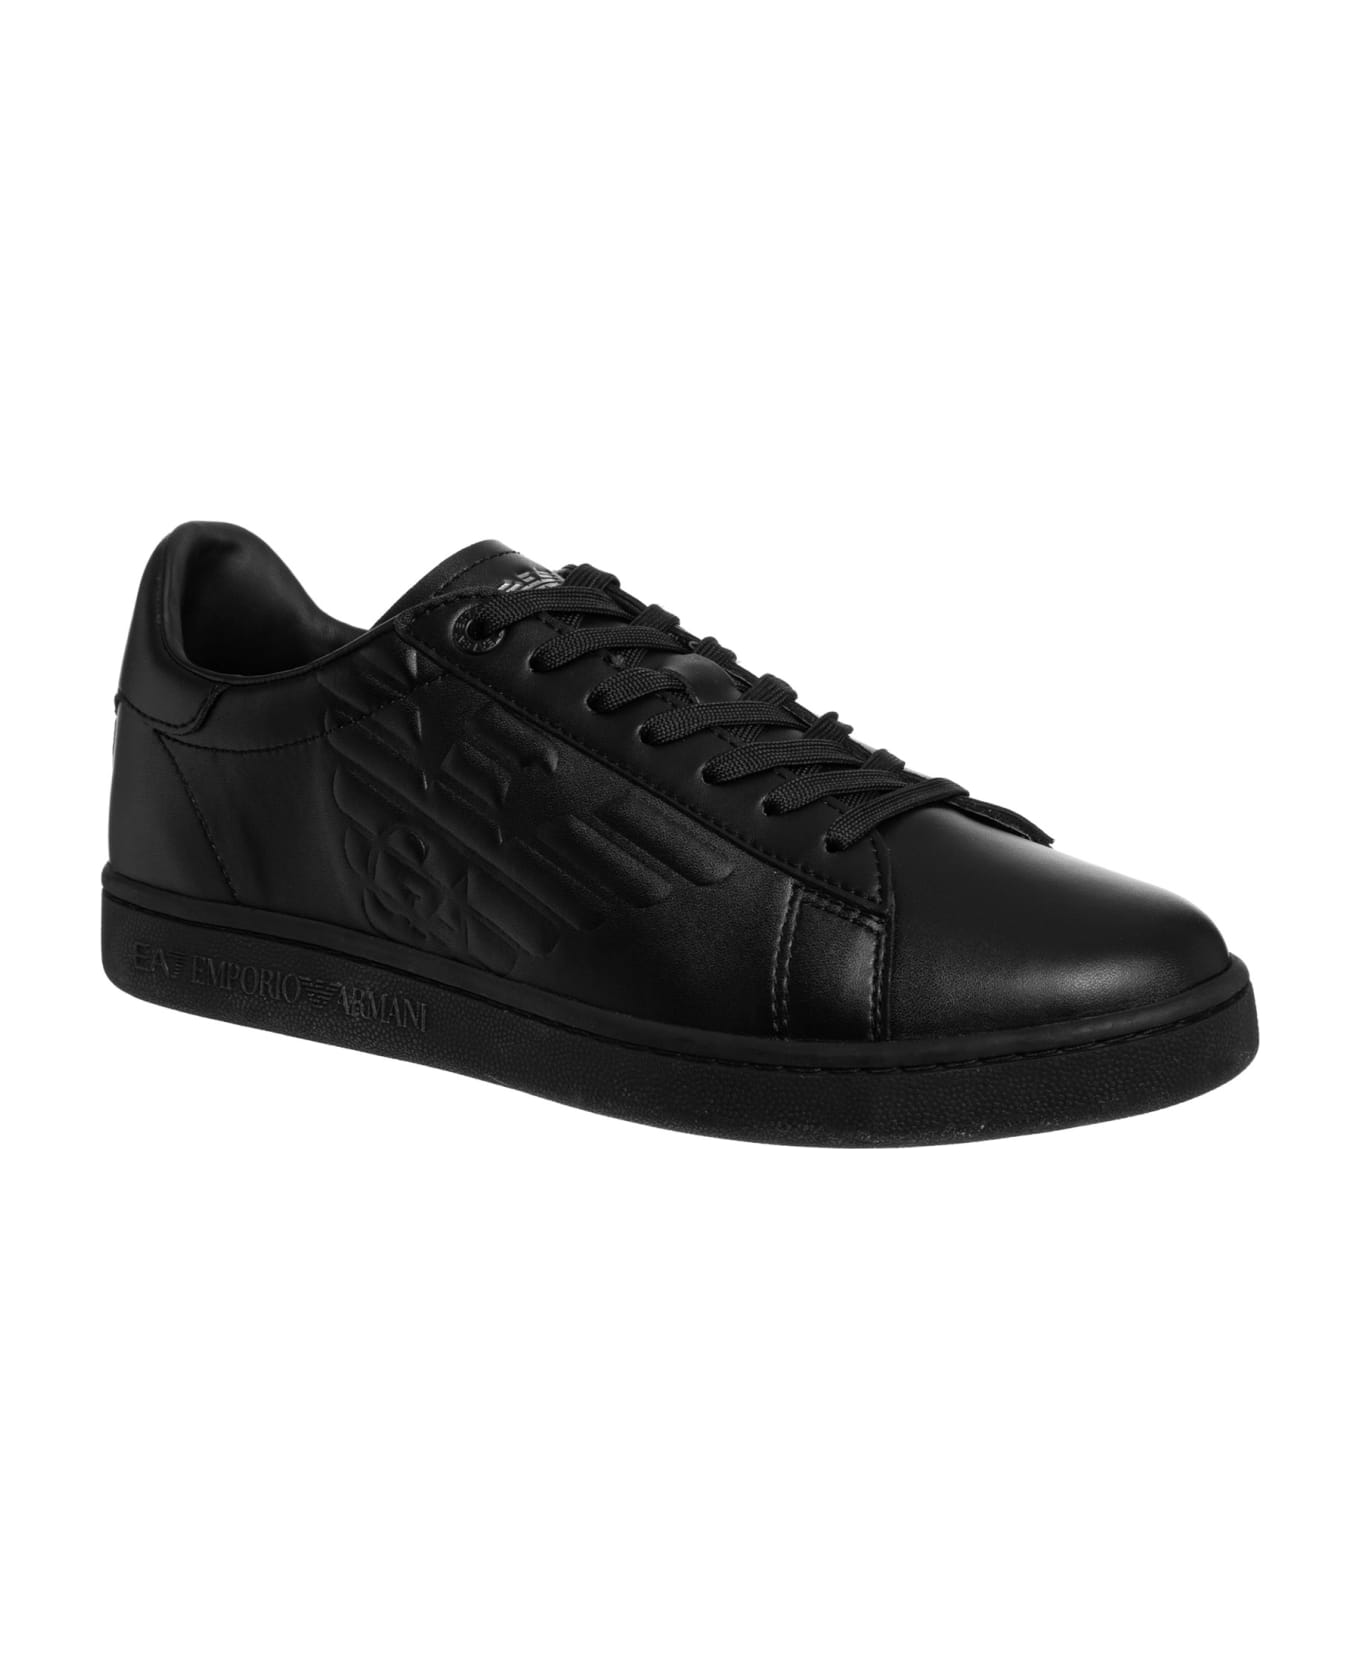 EA7 Classic New Cc Leather Sneakers - Black スニーカー